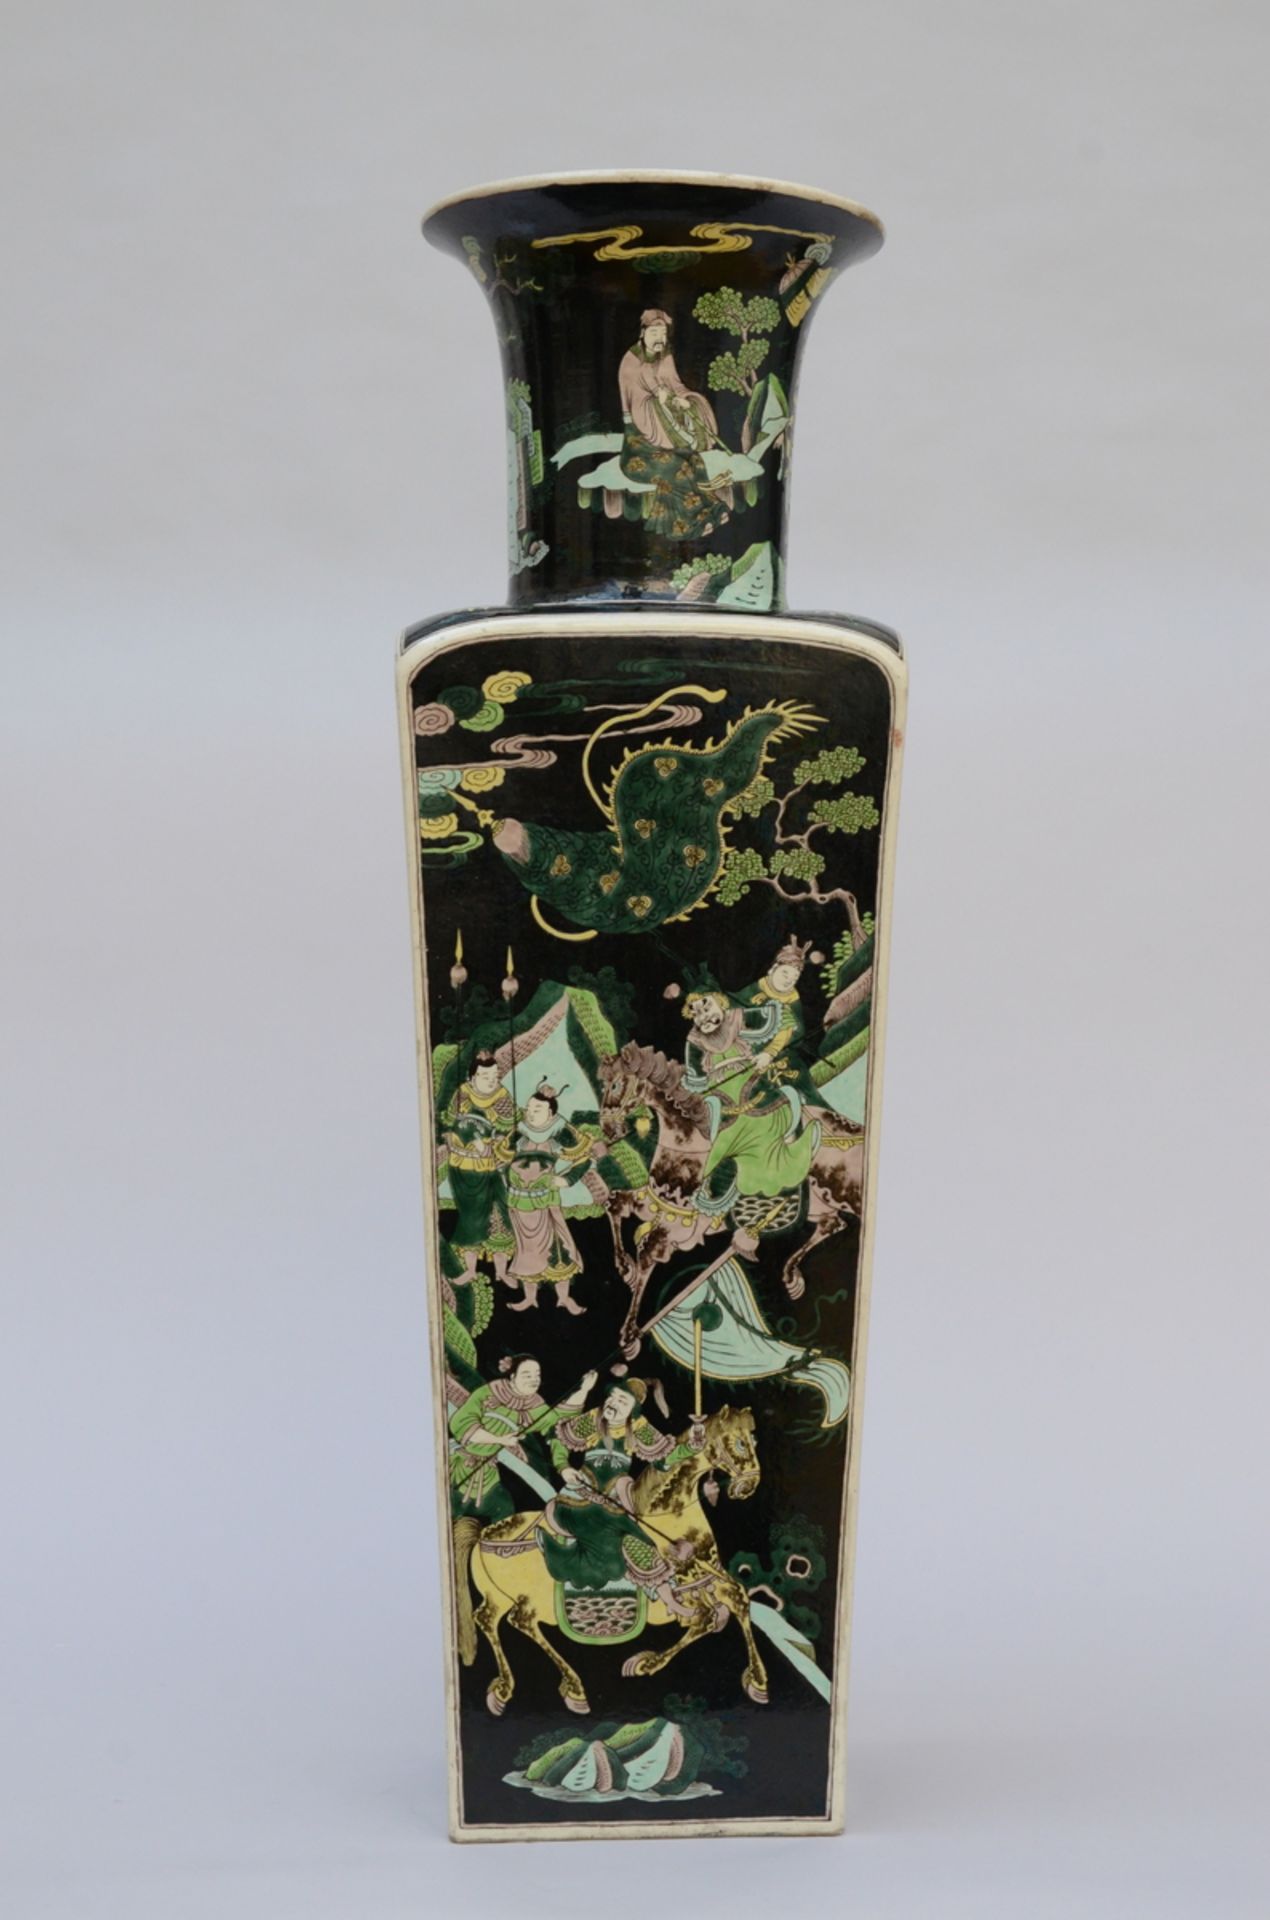 Imposing square vase in Chinese famille noire porcelain 'scene with emperor' (*) (83cm) - Image 6 of 9